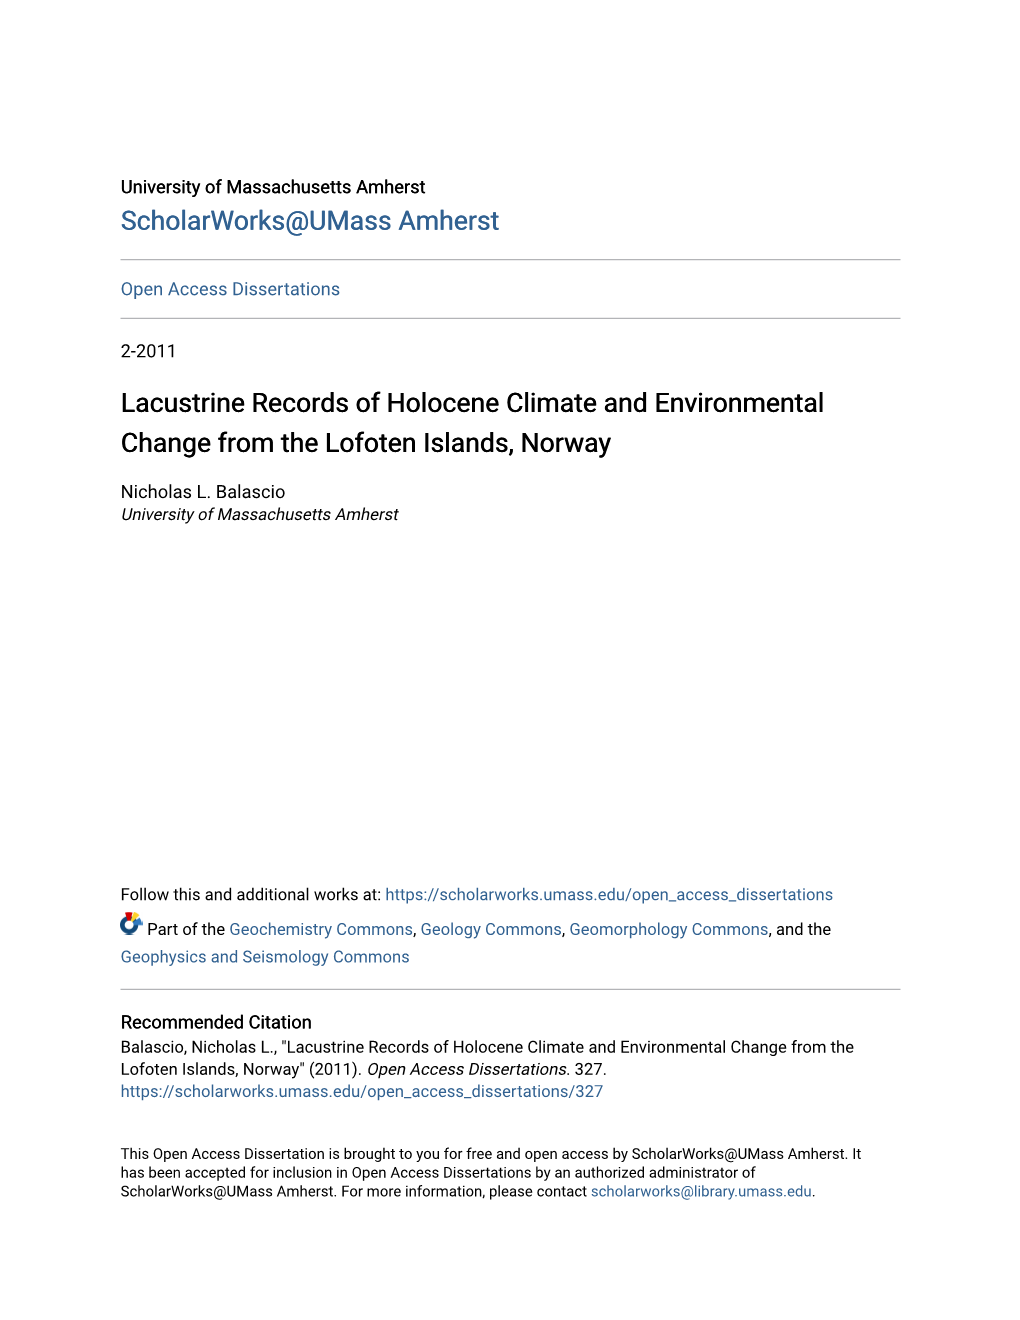 Lacustrine Records of Holocene Climate and Environmental Change from the Lofoten Islands, Norway